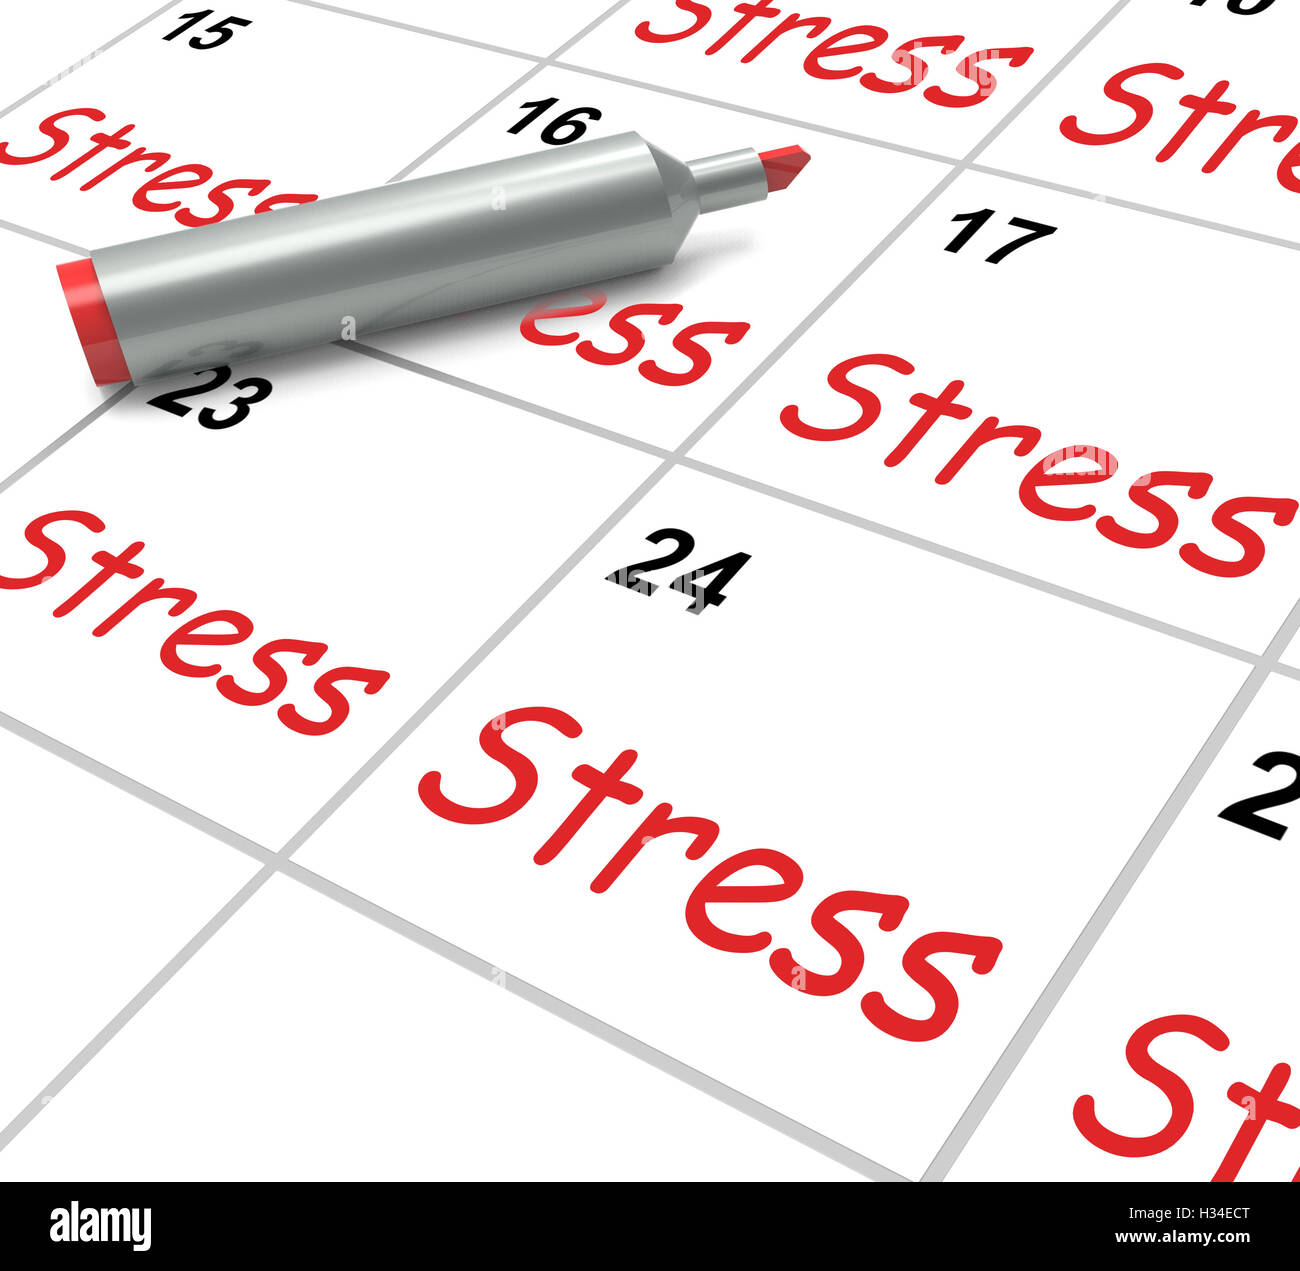 Stress Calendar Means Pressured Tense And Anxious Stock Photo